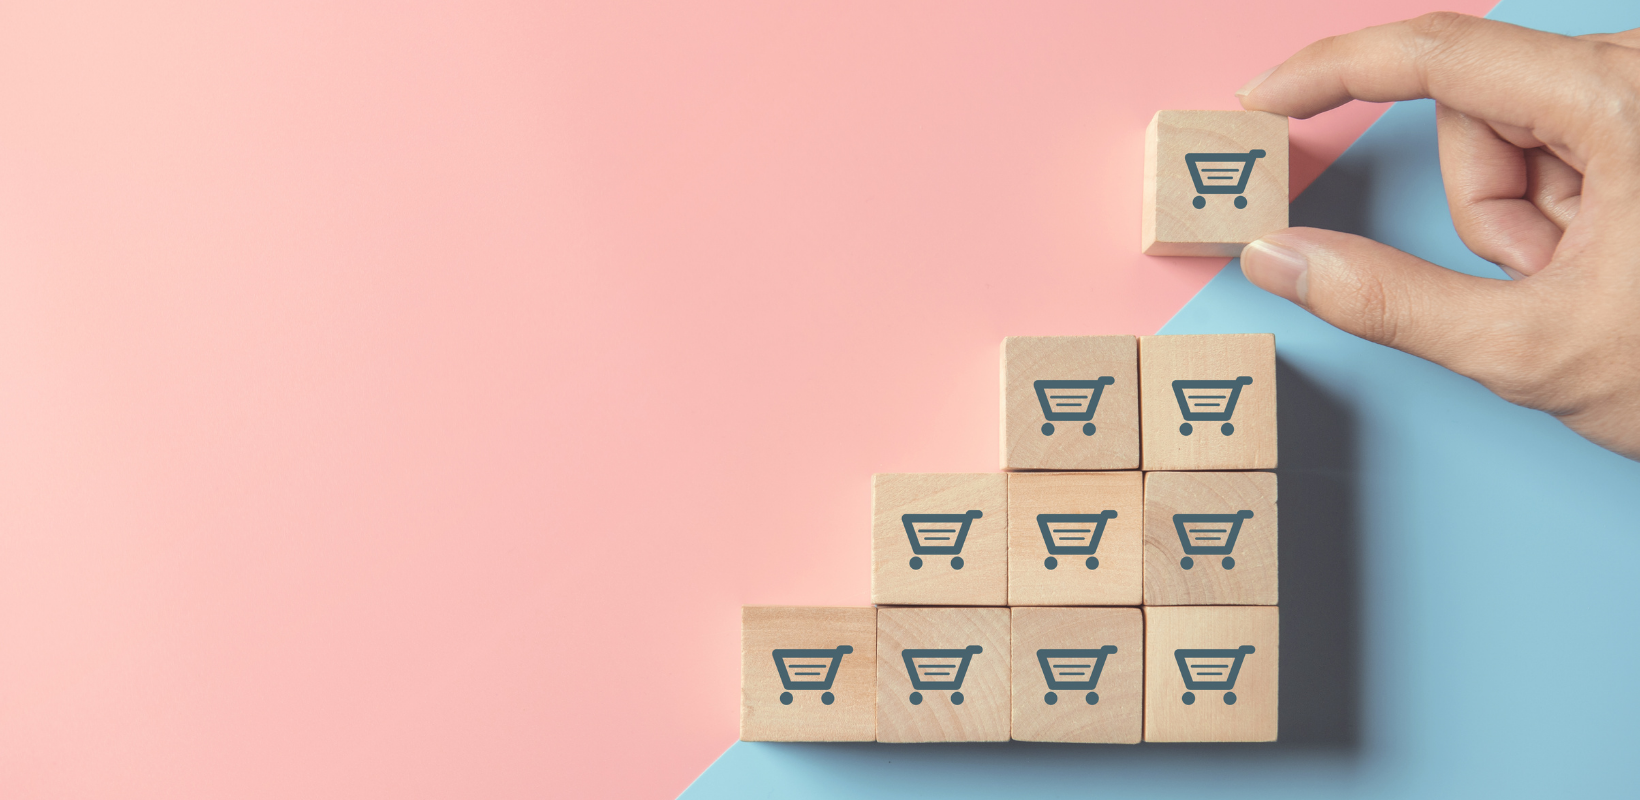 How to Increase Sales on Shopify: 15 Expert-Backed Tips to Try